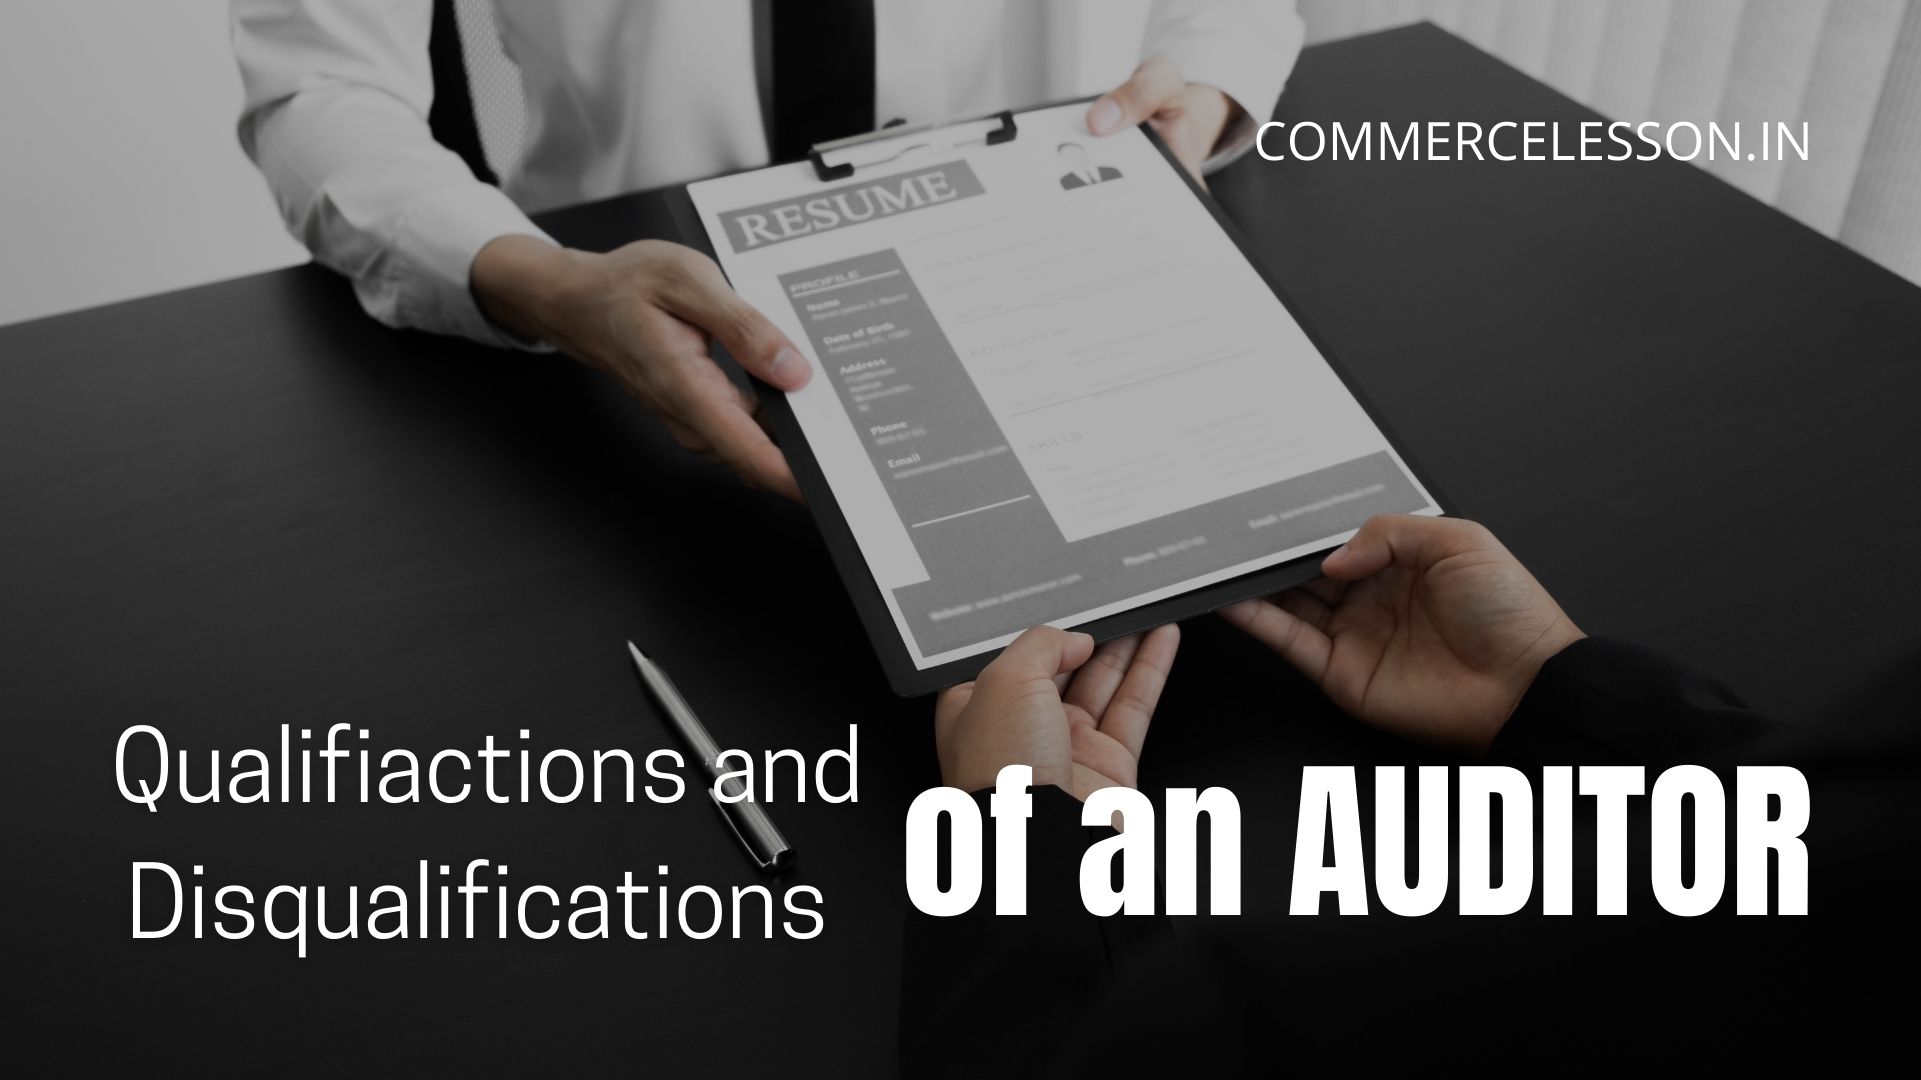 Qualifications and Disqualifications of an Auditor